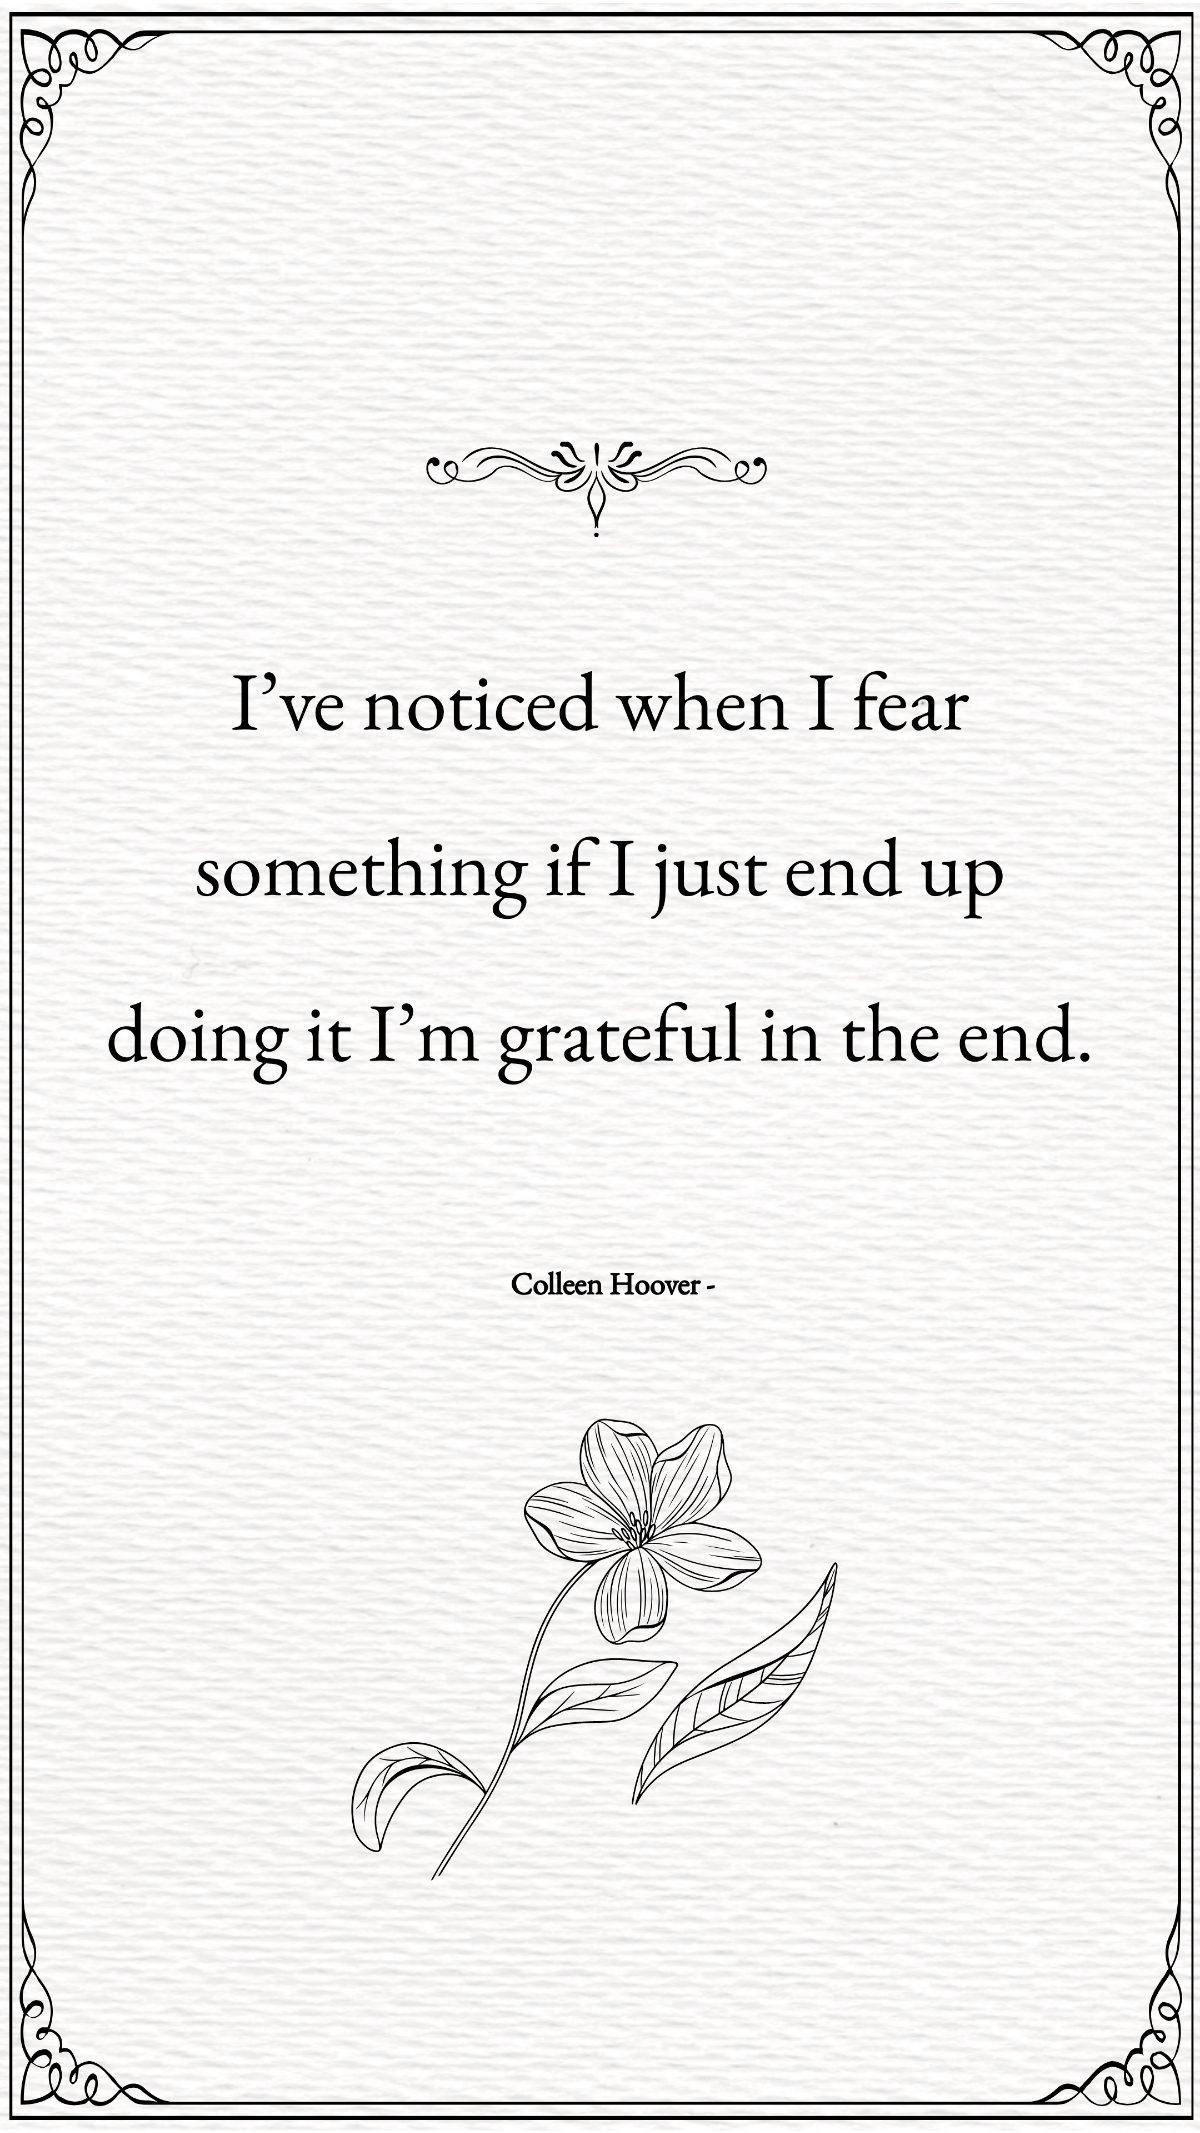 Colleen Hoover - I’ve noticed when I fear something if I just end up doing it I’m grateful in the end. Template